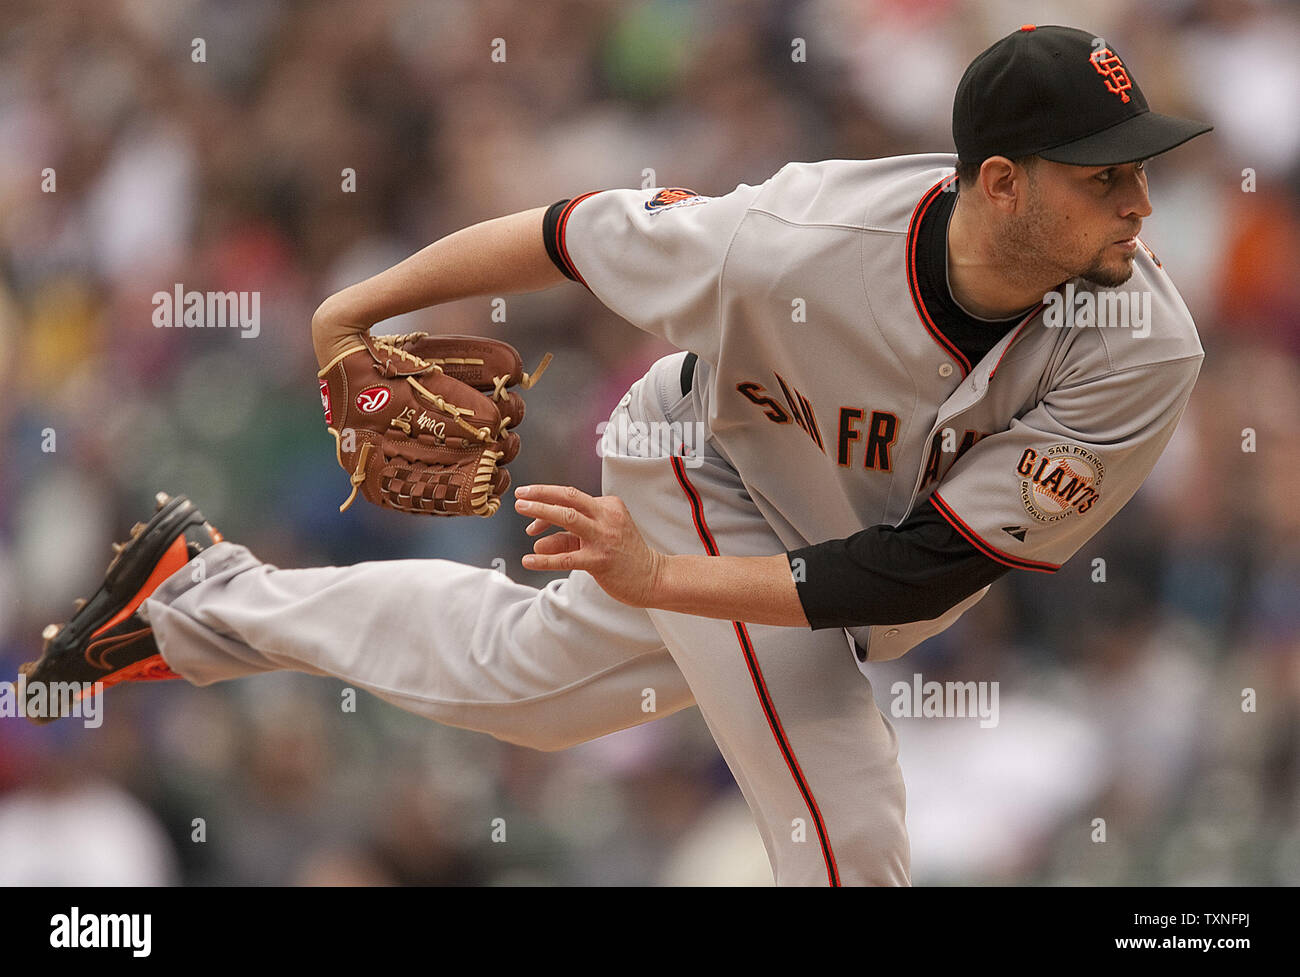 Giants starting pitcher Jonathan Sanchez is joined by catcher Buster Posey  and Pablo Sandoval in the second inning with the bases loaded at AT&T Park  on Tuesday. (Michael Macor/San Francisco Chronicle via